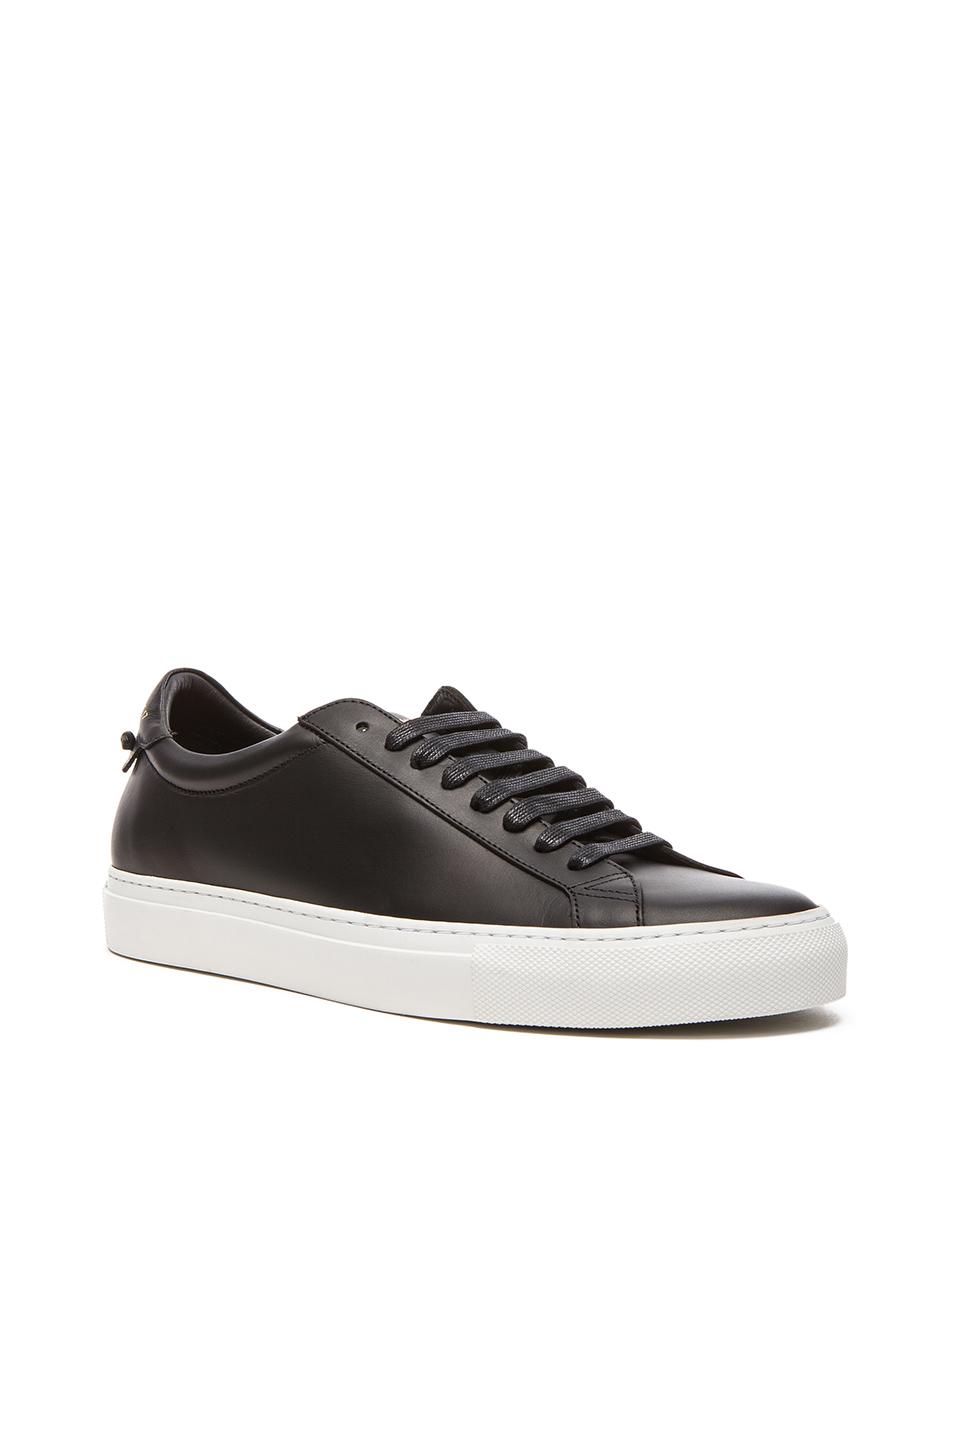 Givenchy Knot Leather Trainers in Black 